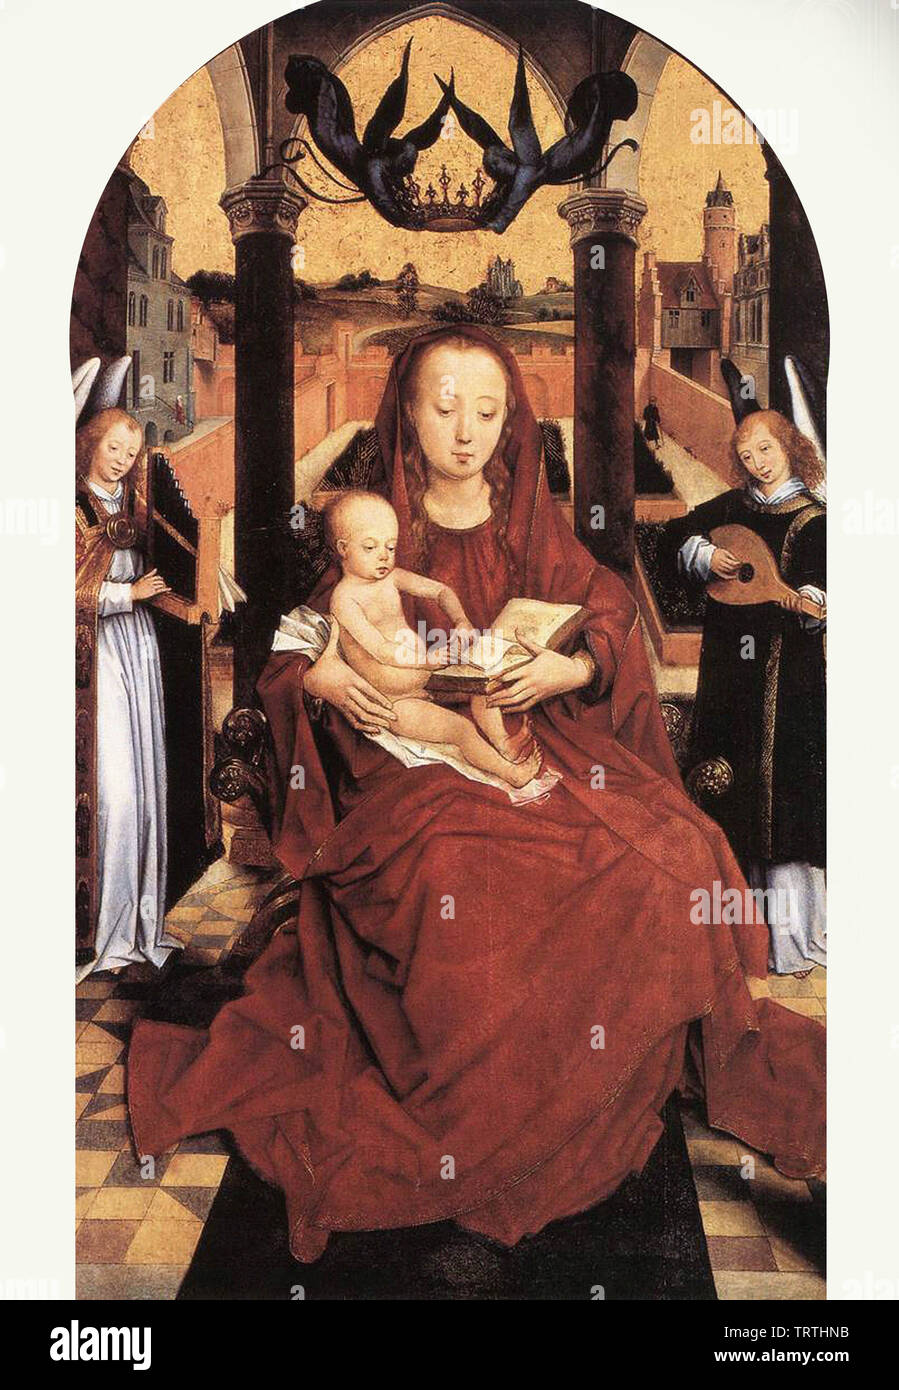 Hans Memling - Virgin Child Enthroned With Two Musical Angels 1467 Stock Photo